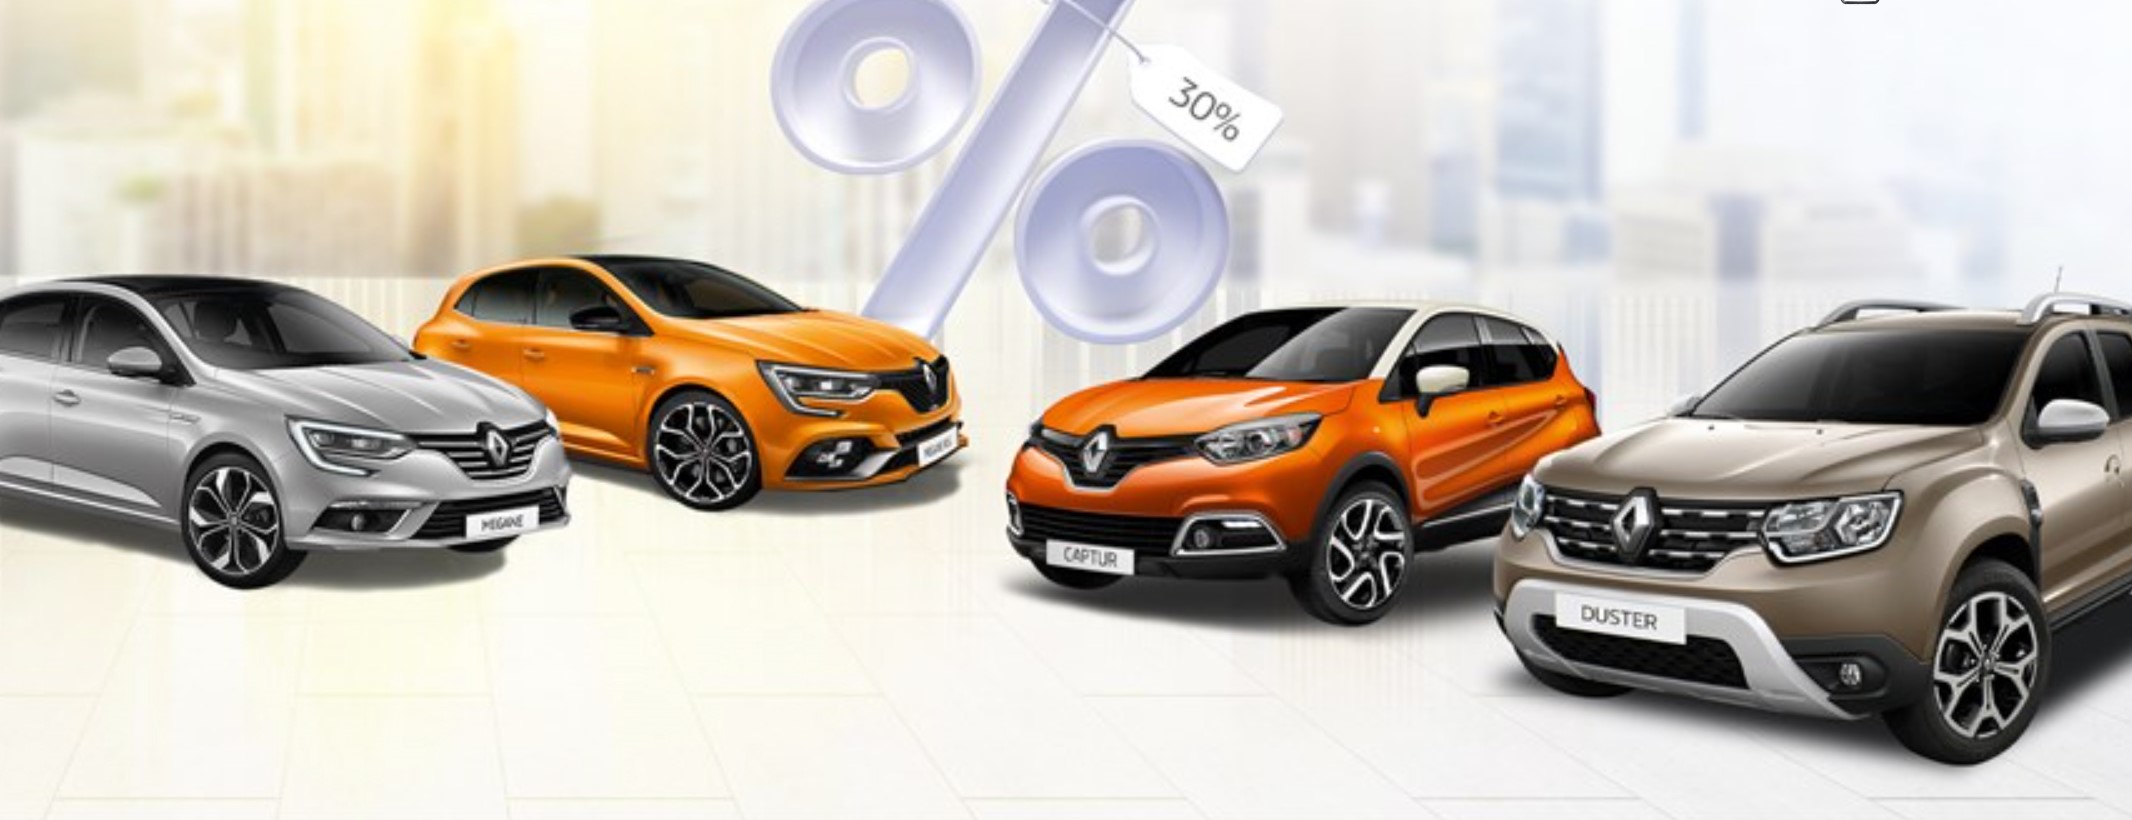 Al Masaood Automobiles Launches ‘Drive Your Renault With Our Best Offer’ Campaign